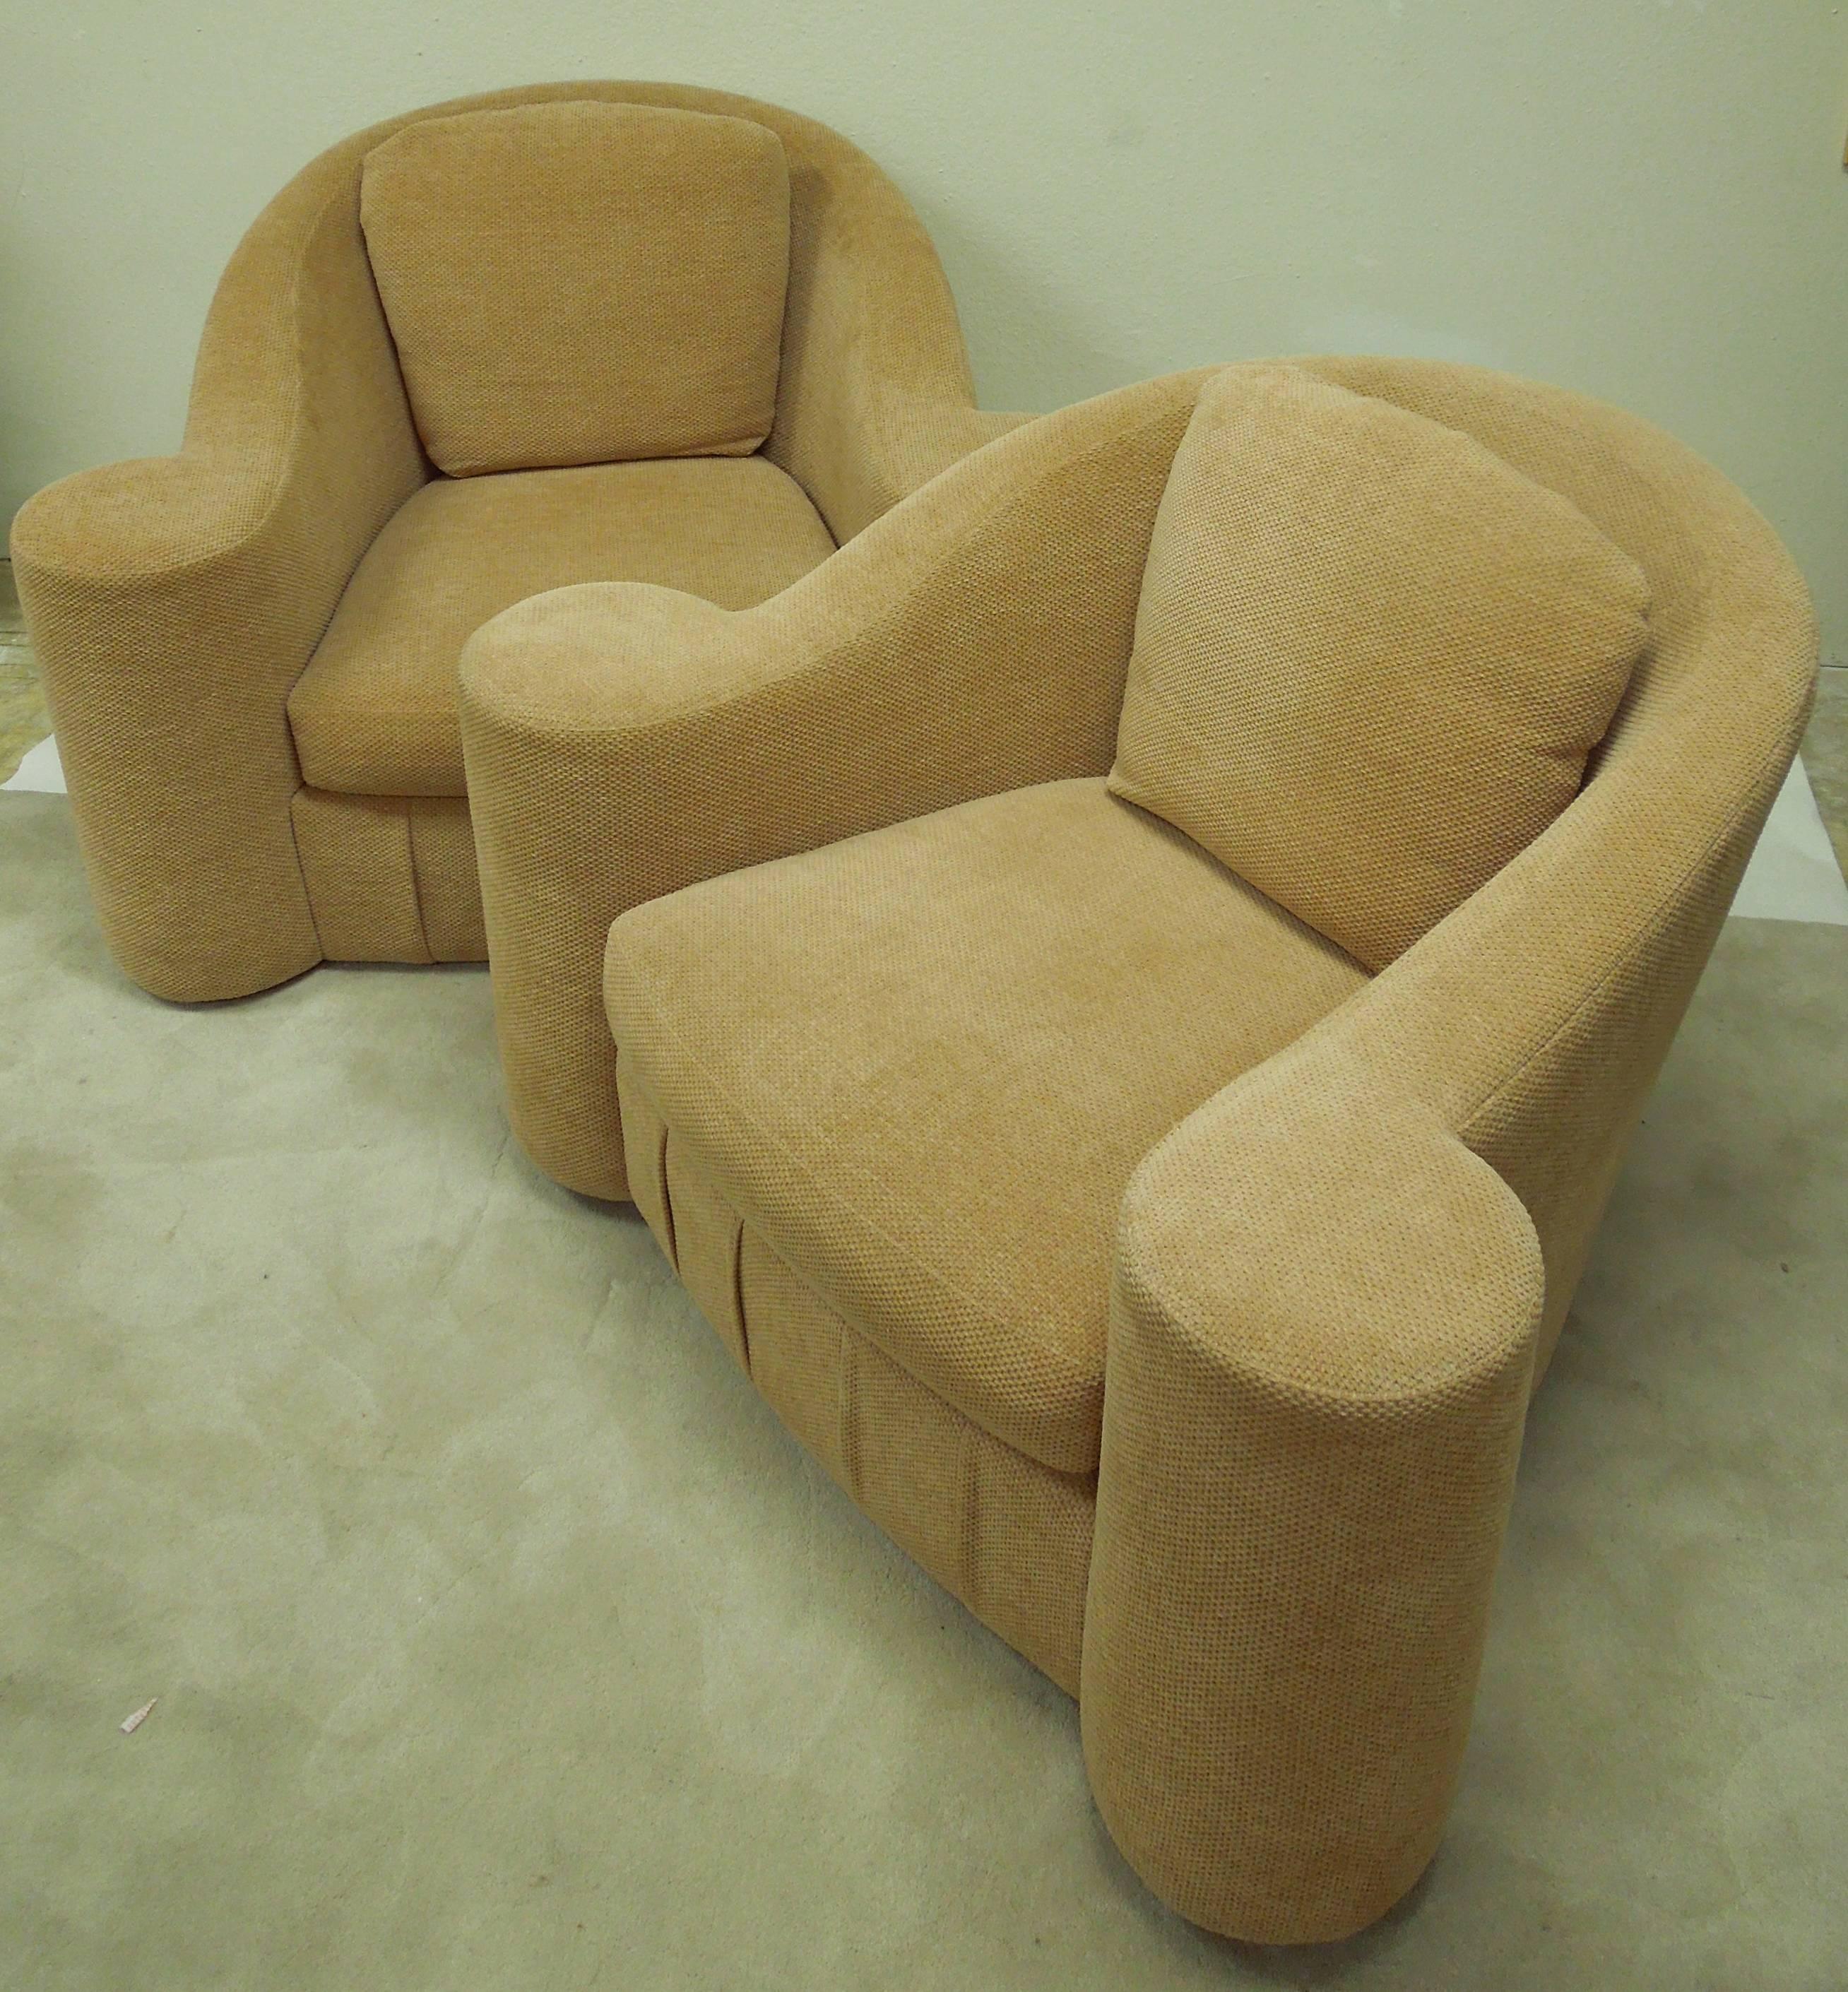 American Large Pair of 1990s Modern Swivel Chairs from a Steve Chase Estate